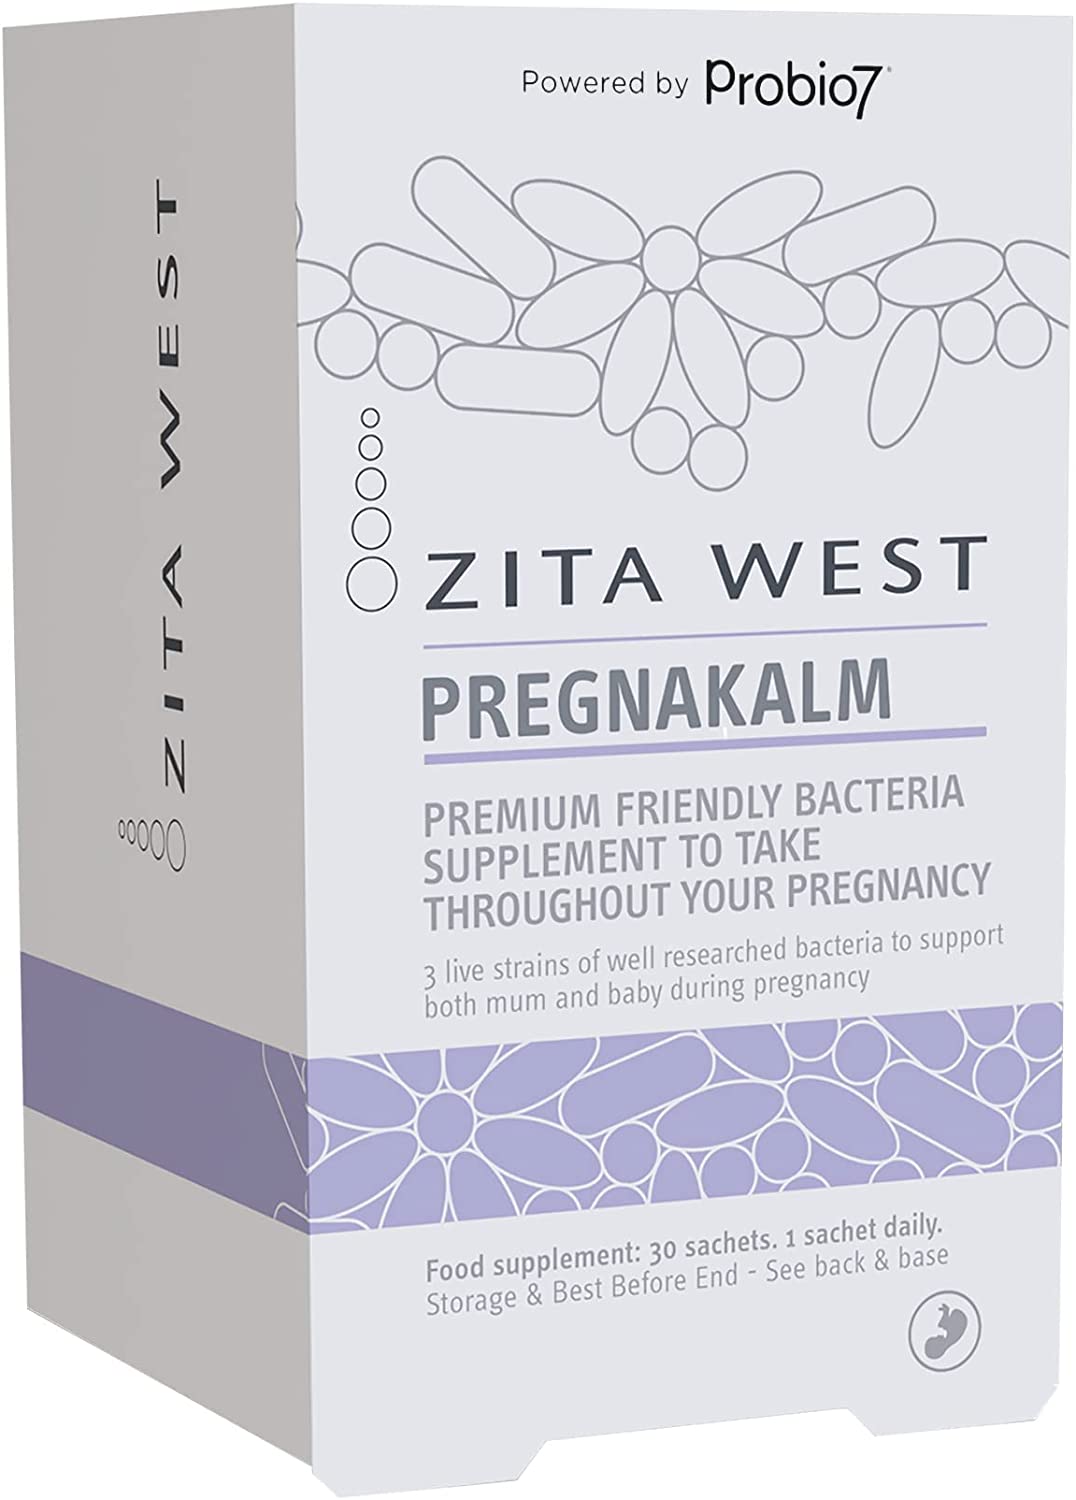 Probio7 Zita West Pregnakalm Bacteria Supplement For Pregnancy 30 Sachets RRP £29.99 CLEARANCE XL £9.99